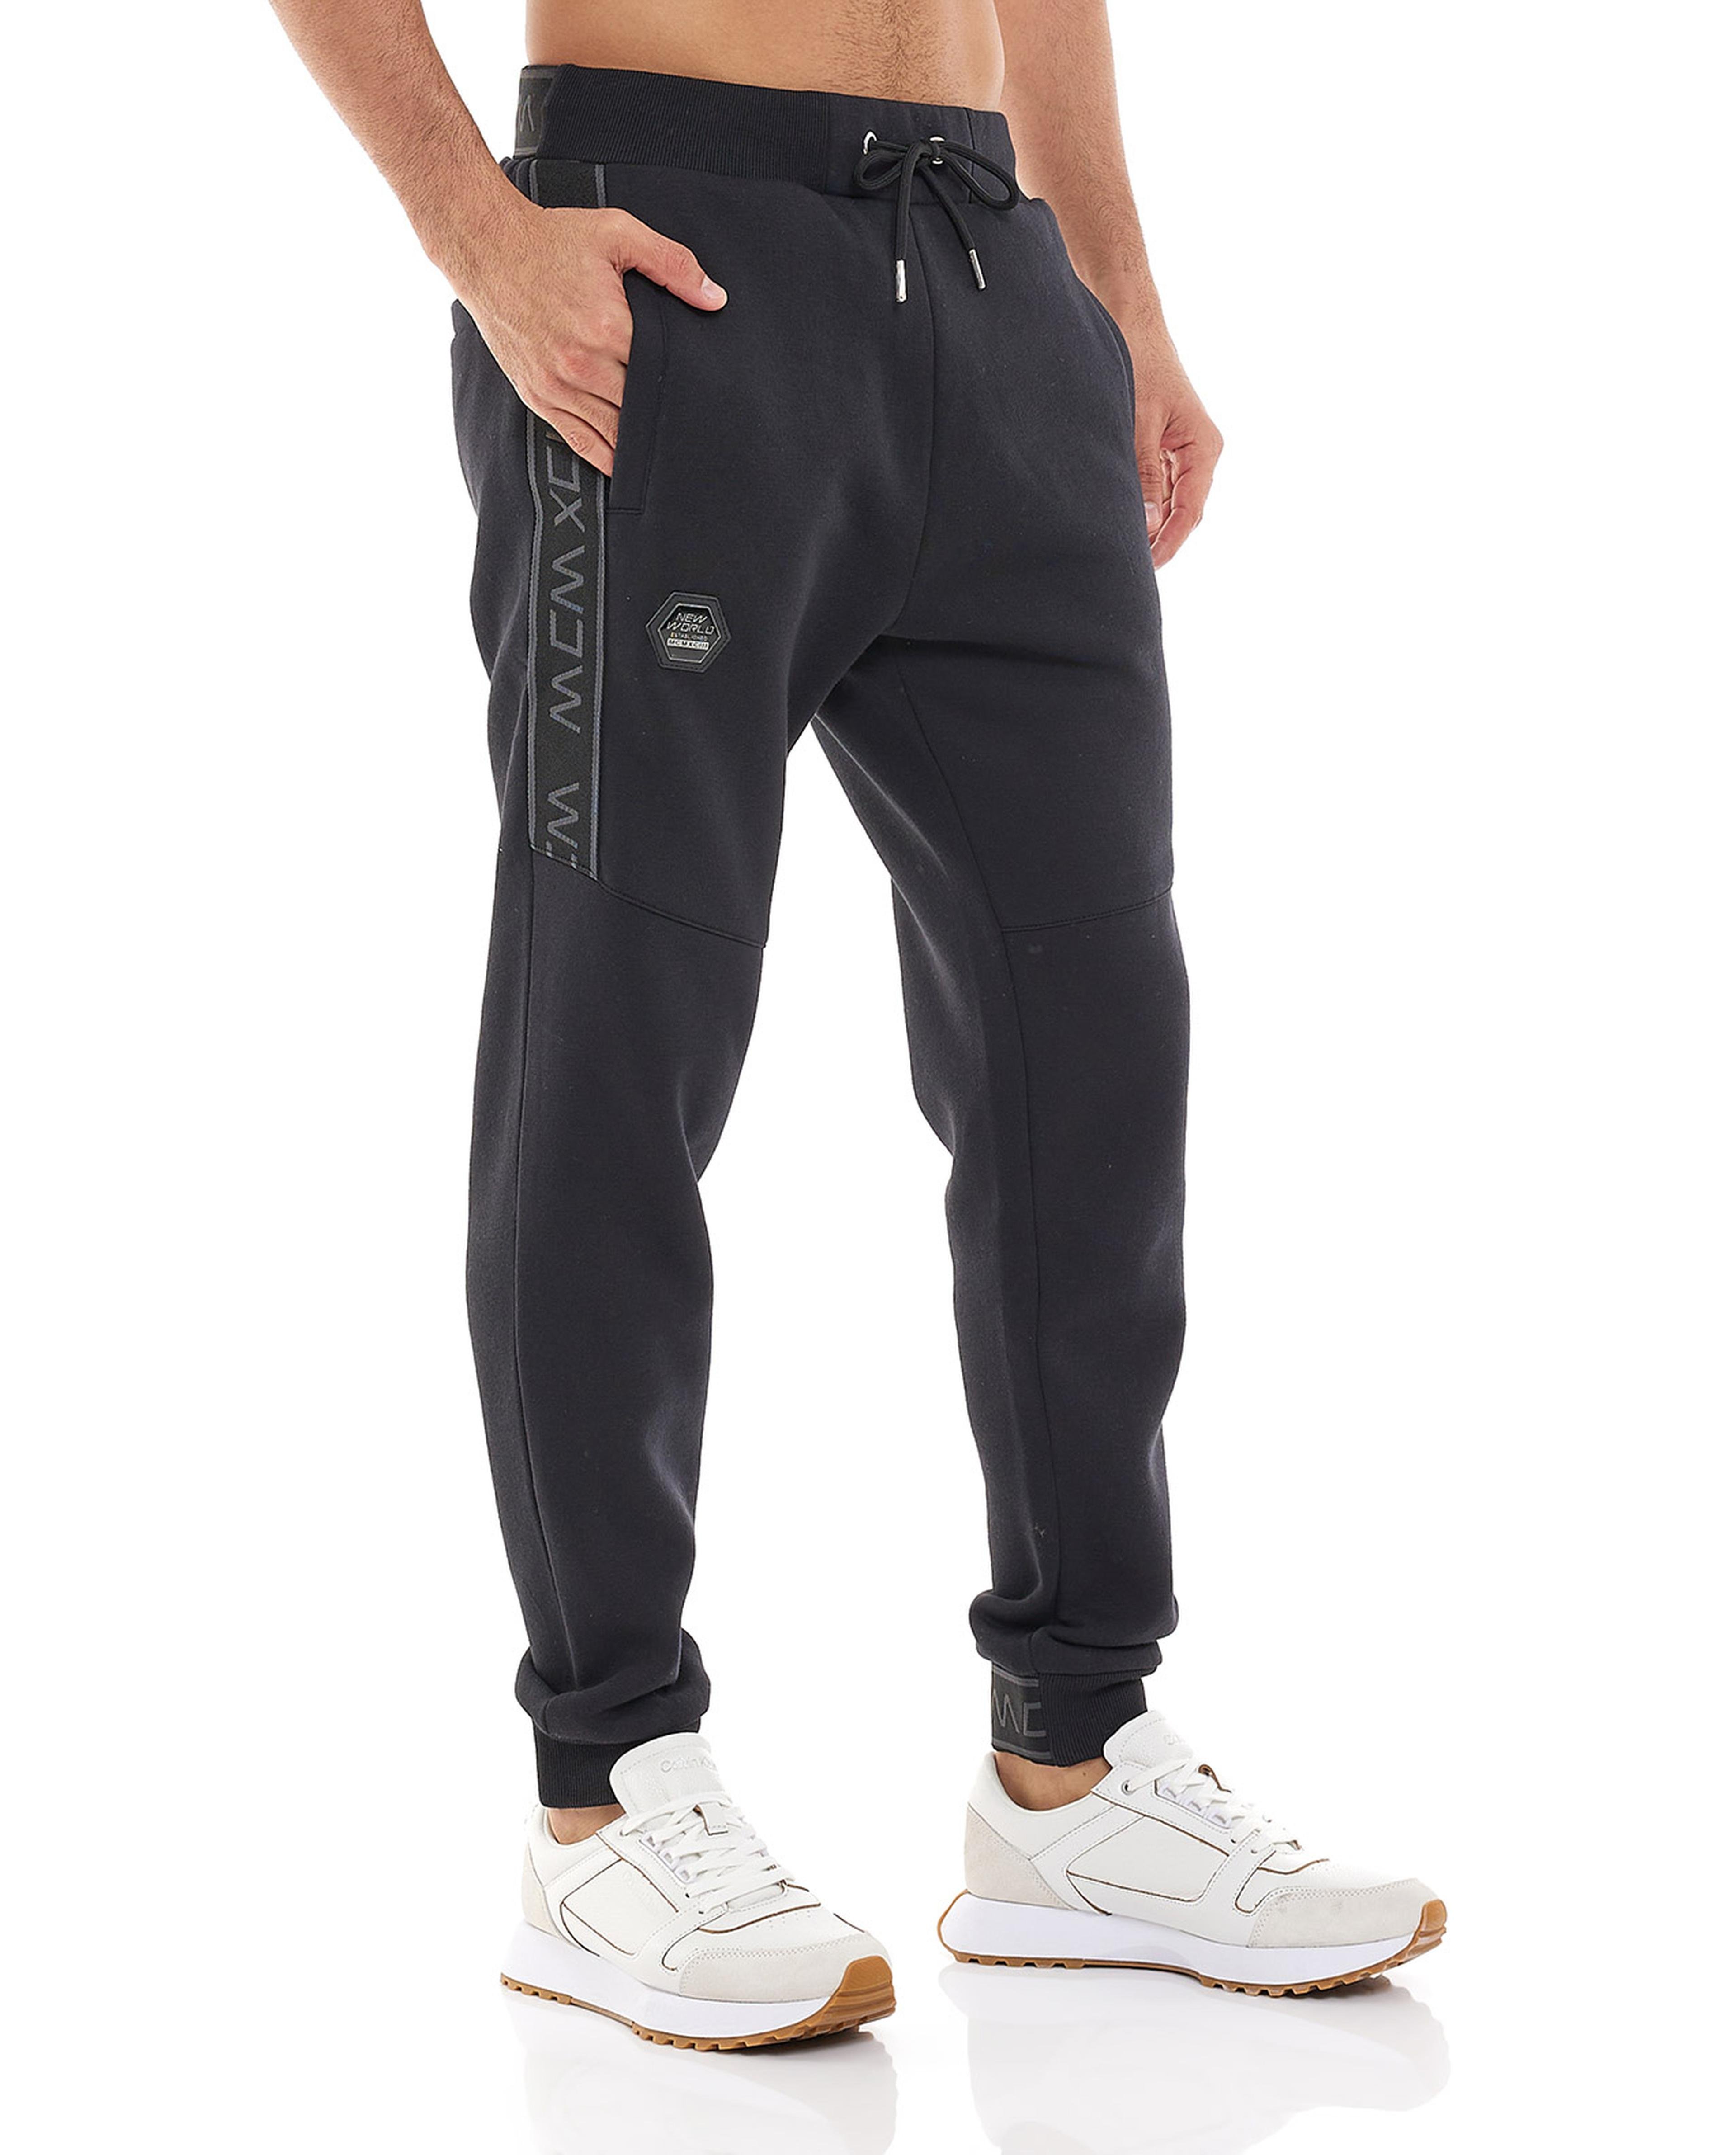 Tape Detail Joggers with Drawstring Waist